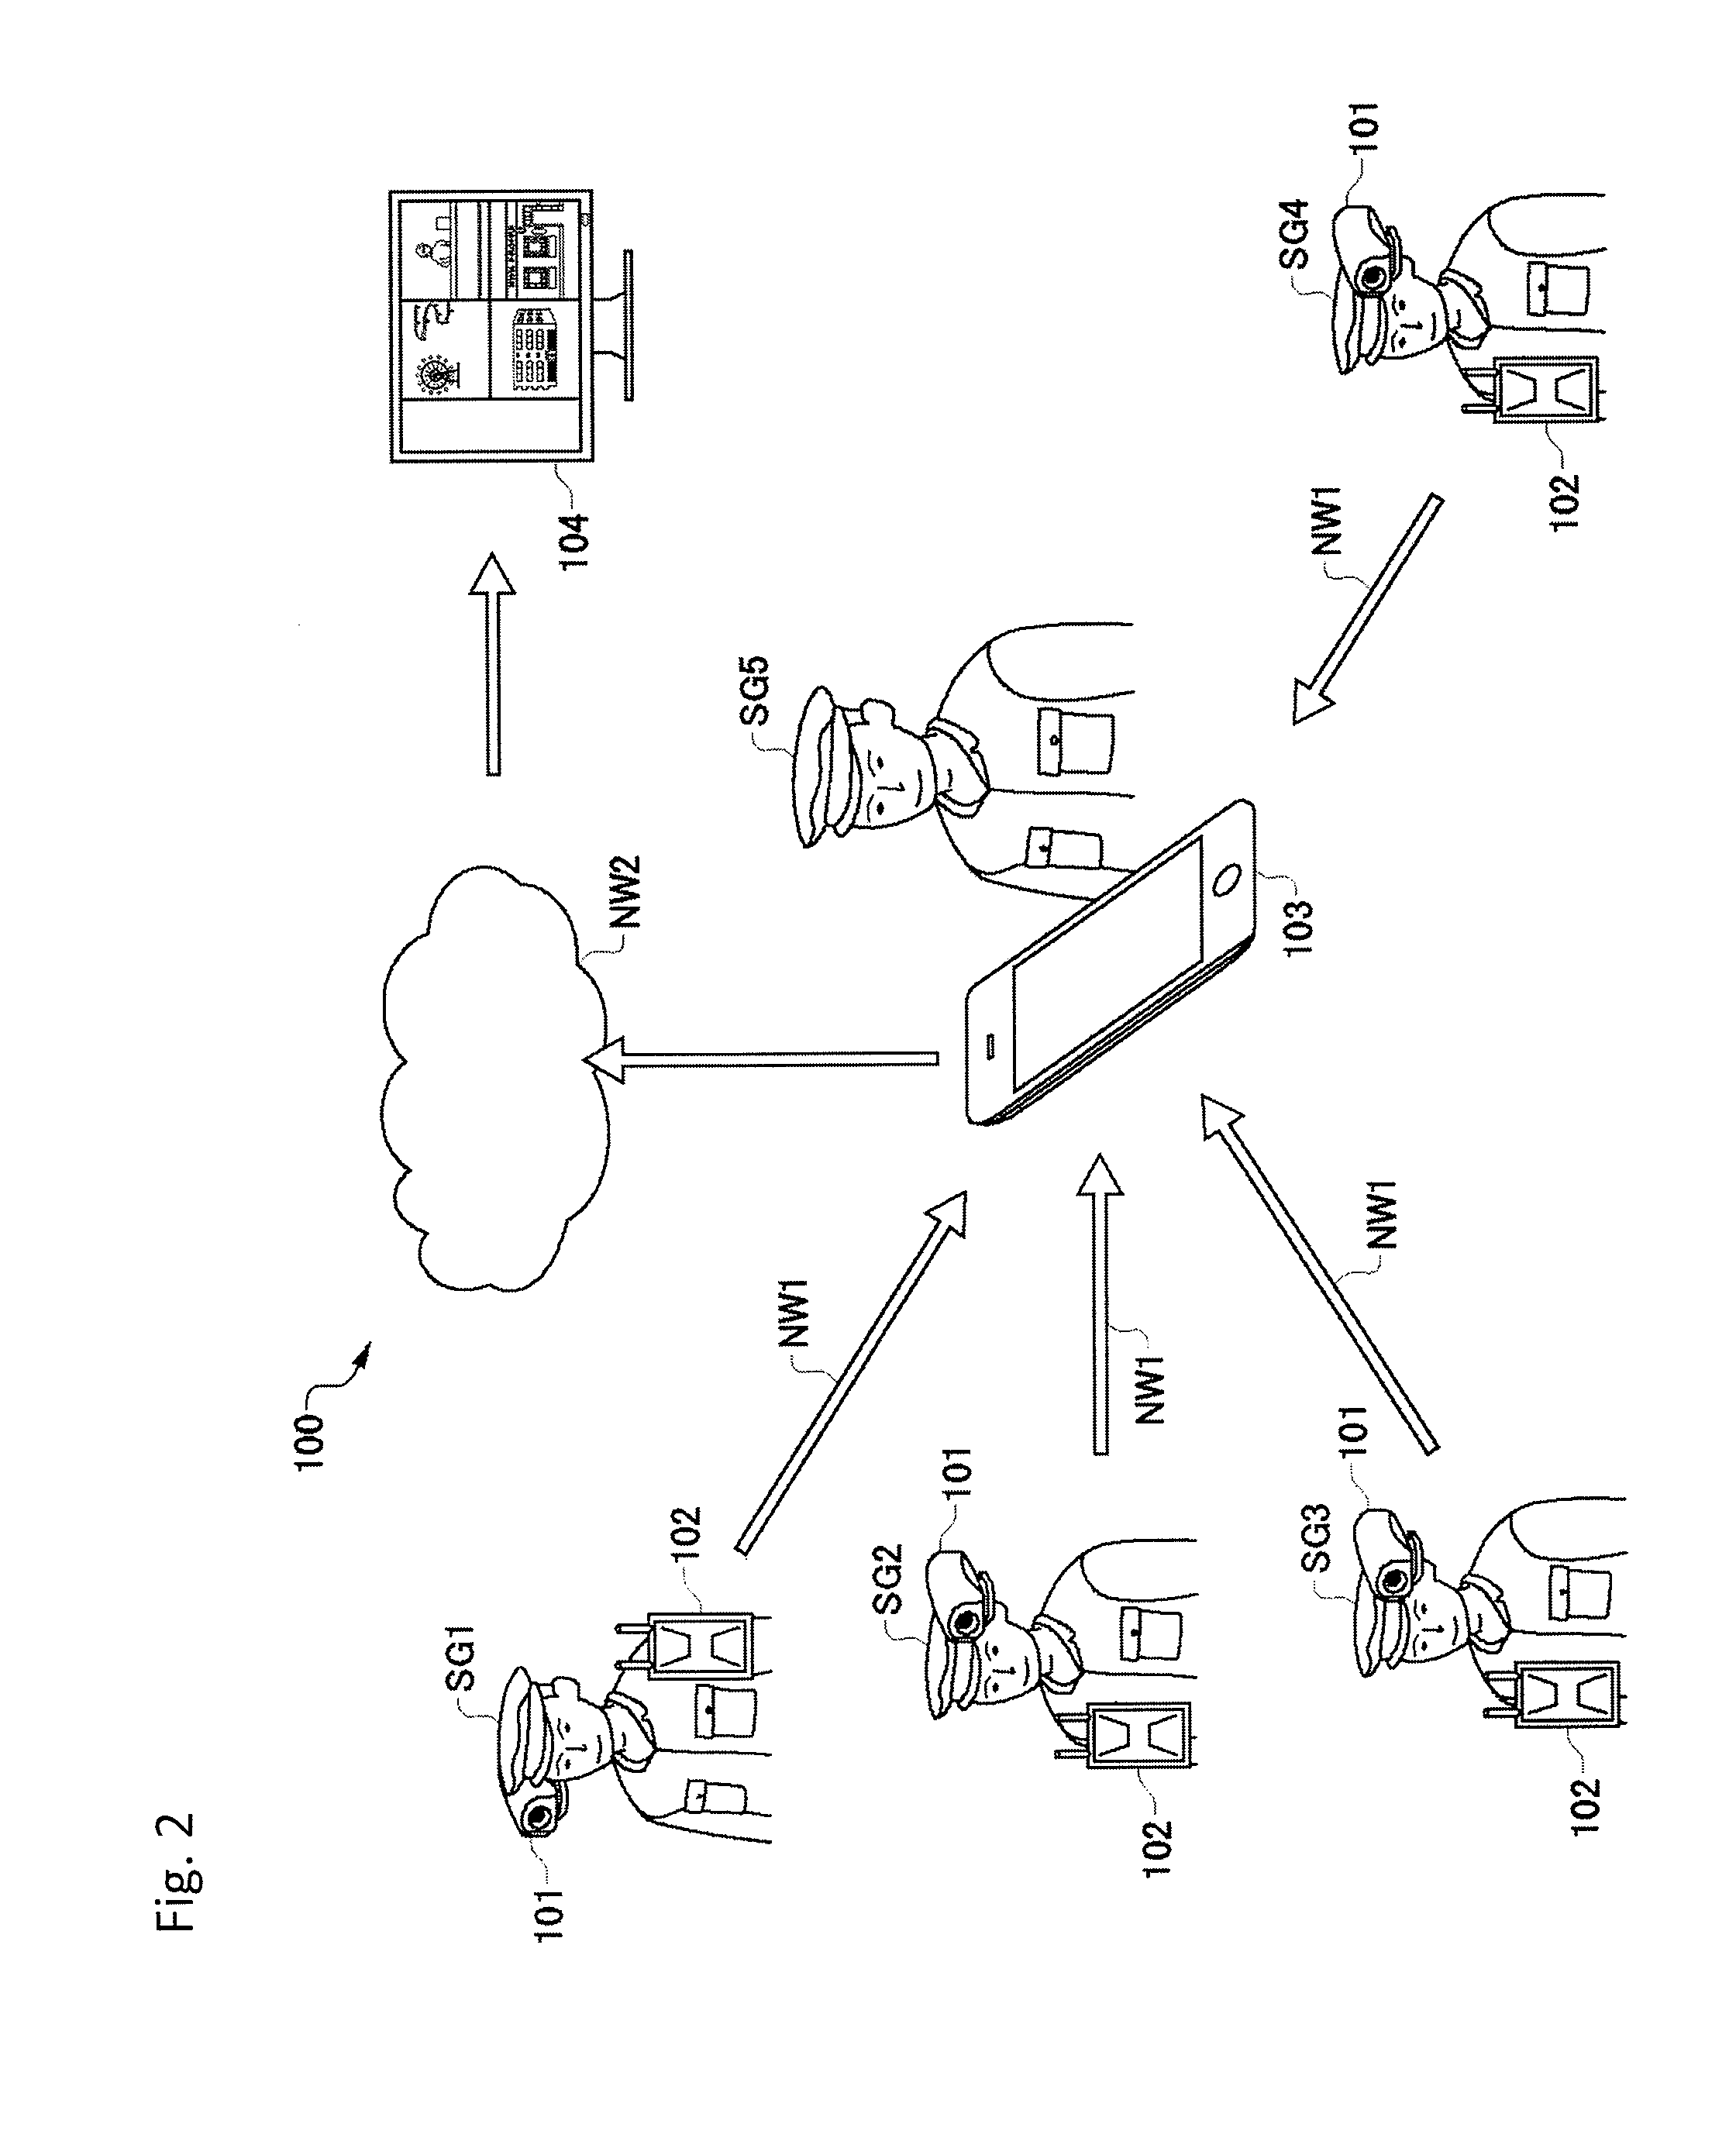 Image display system, image composing and re-encoding apparatus, image display apparatus, method of displaying image, and computer-readable storage medium having stored therein image composing and re-encoding program